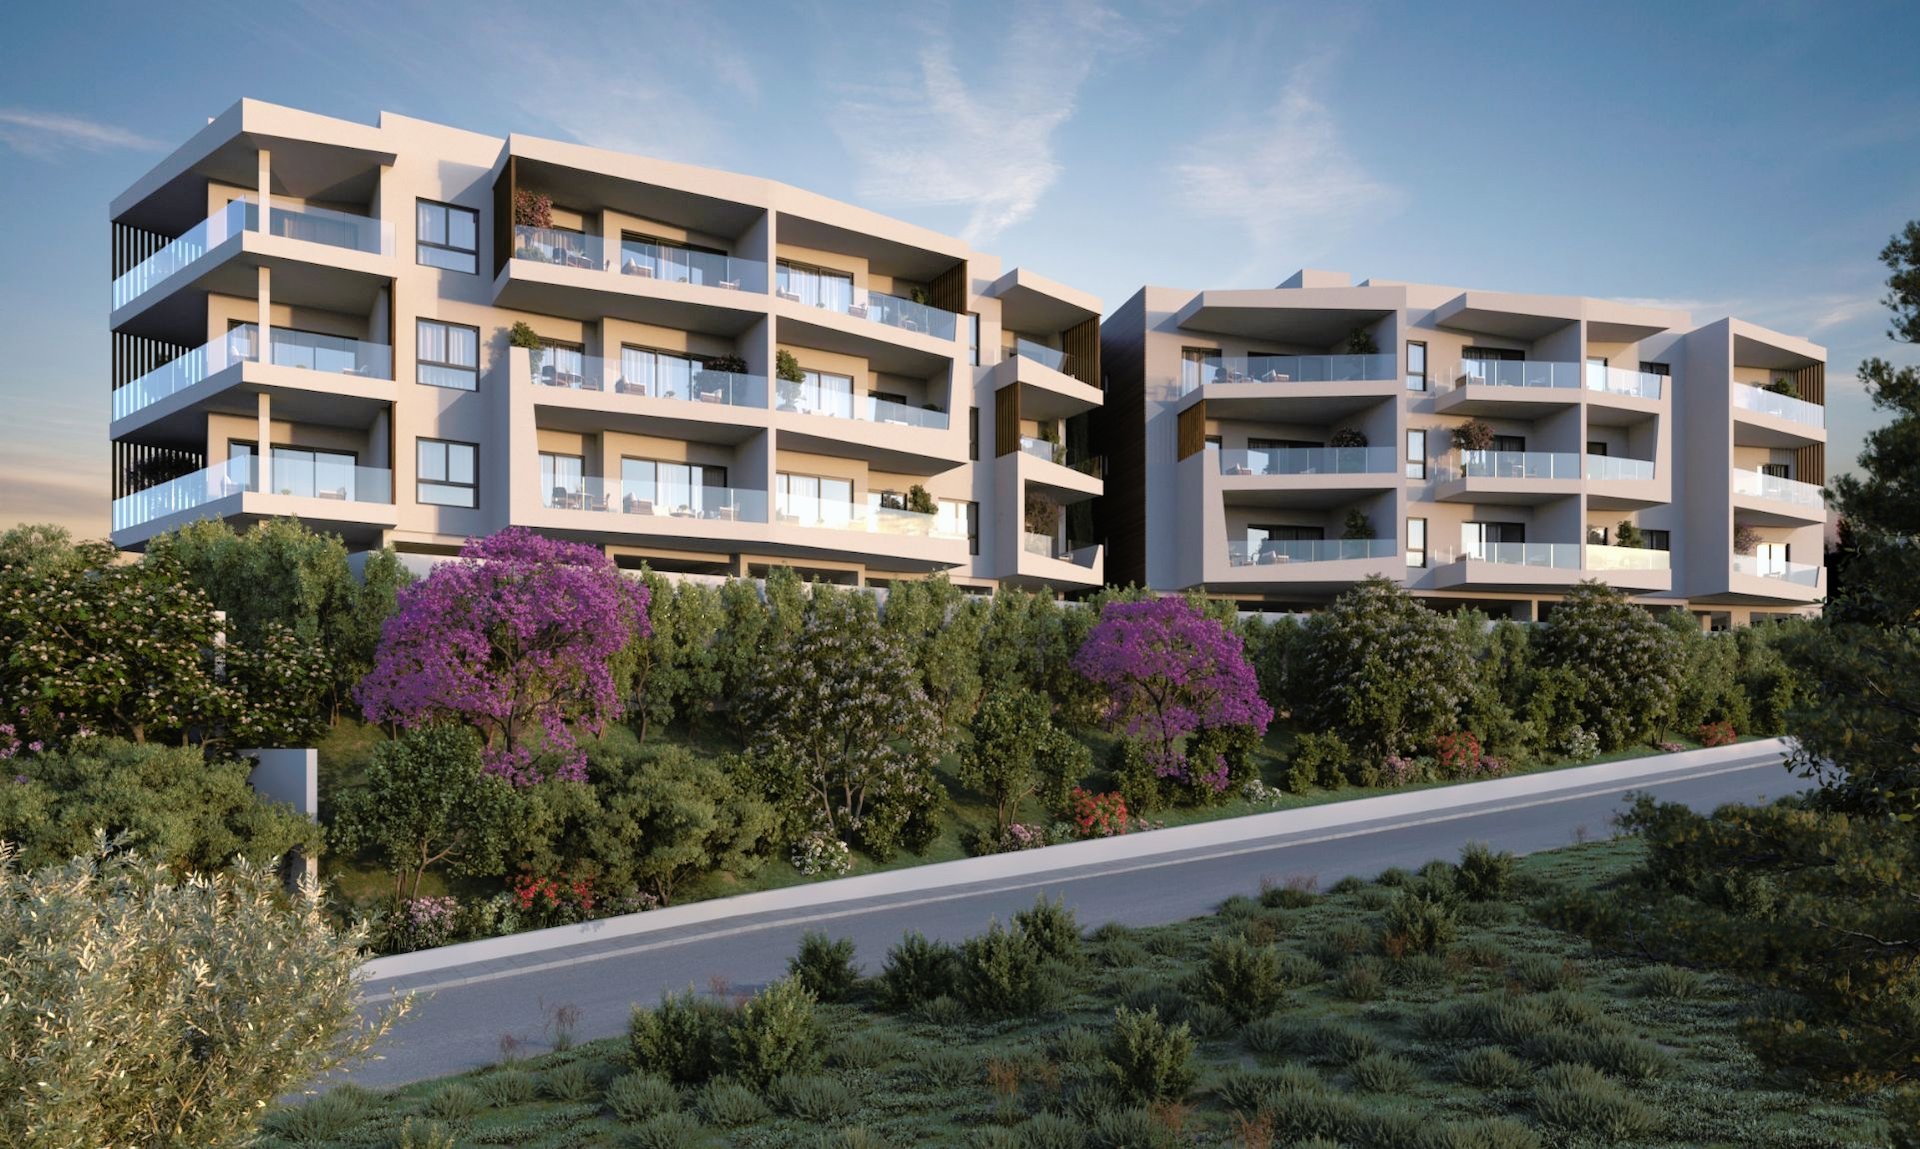 1 Bedroom Apartment for Sale in Limassol – Αgios Athanasios